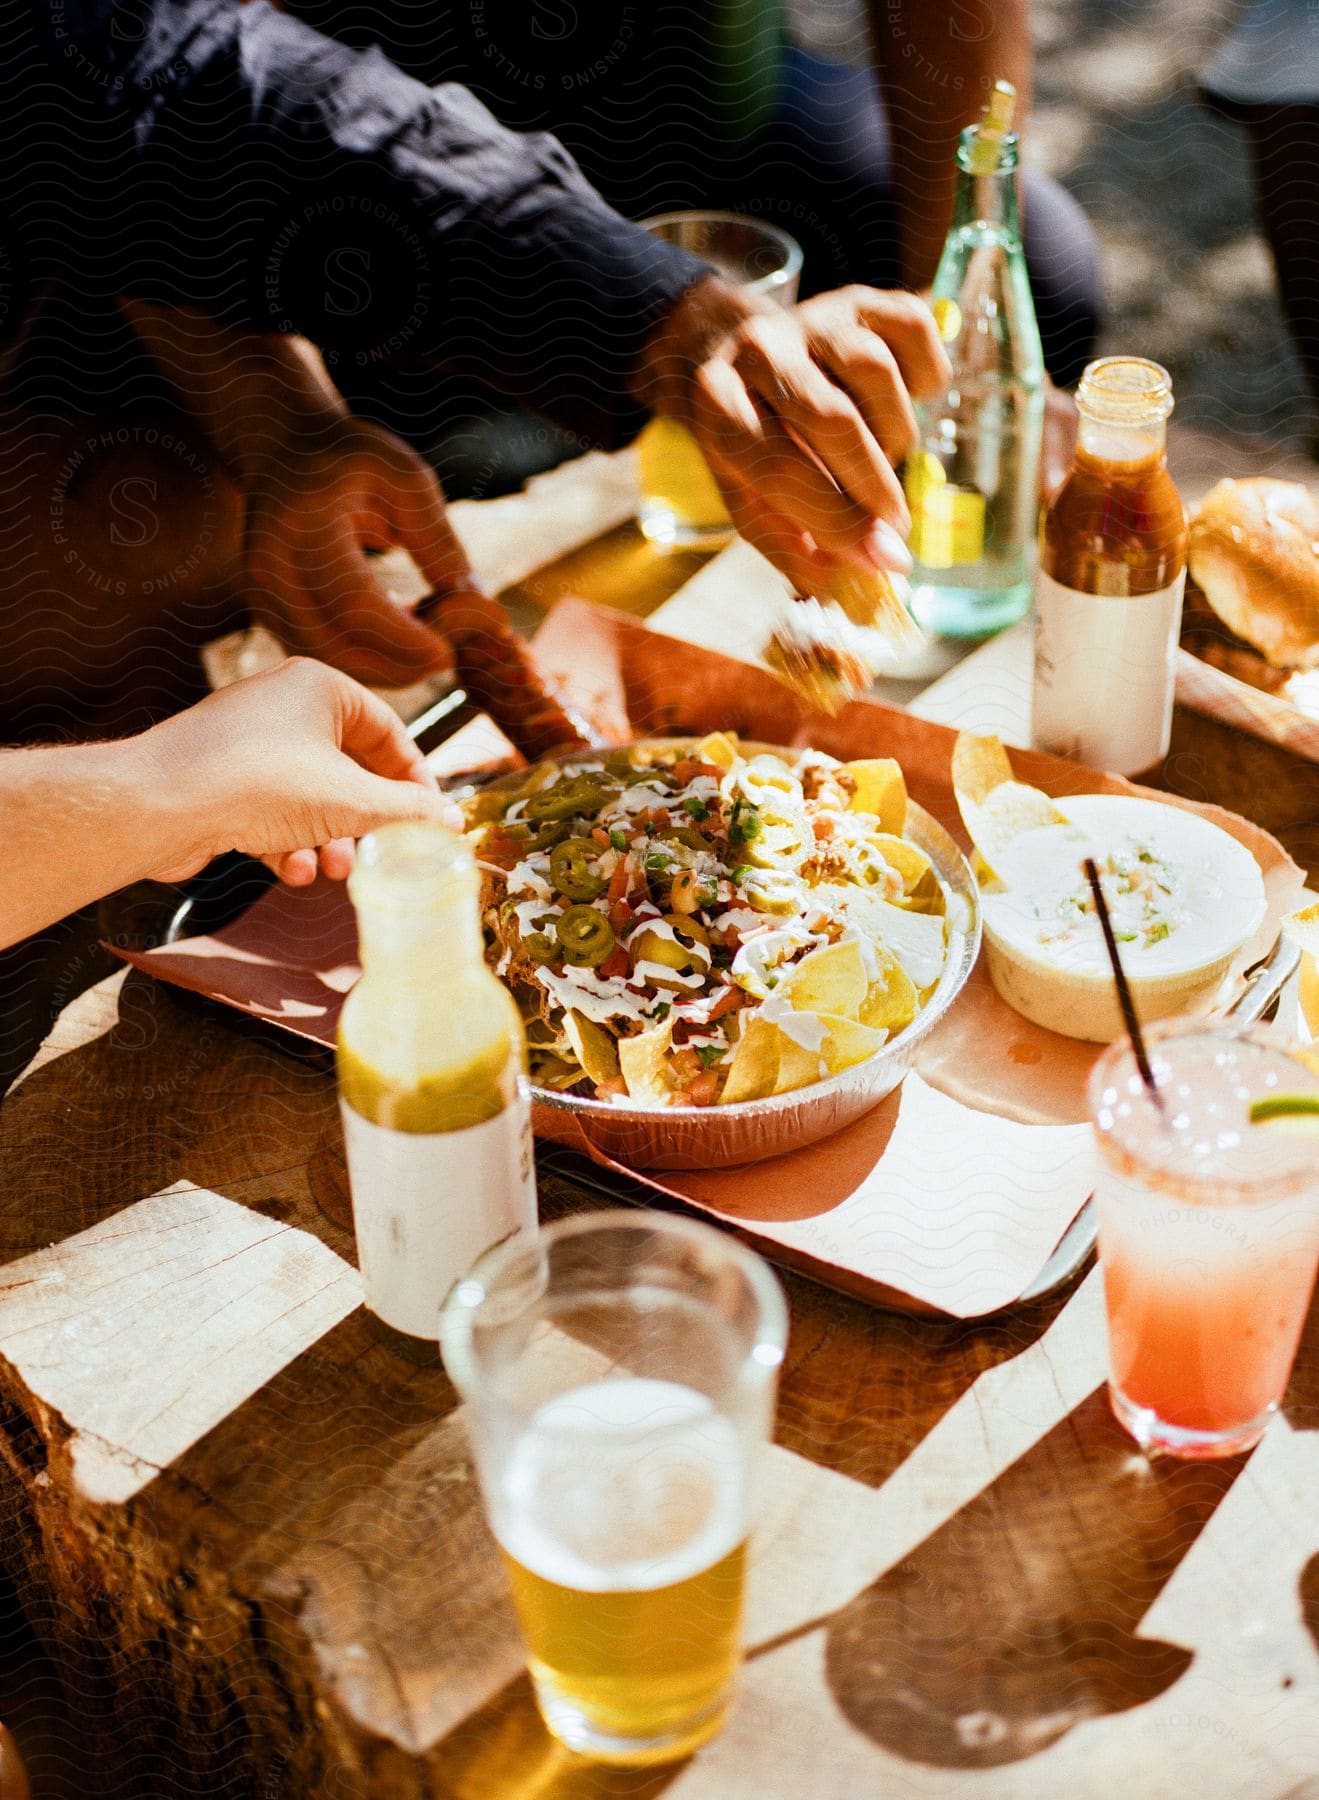 A small group of people are drinking and eating nachos in an outdoor setting.